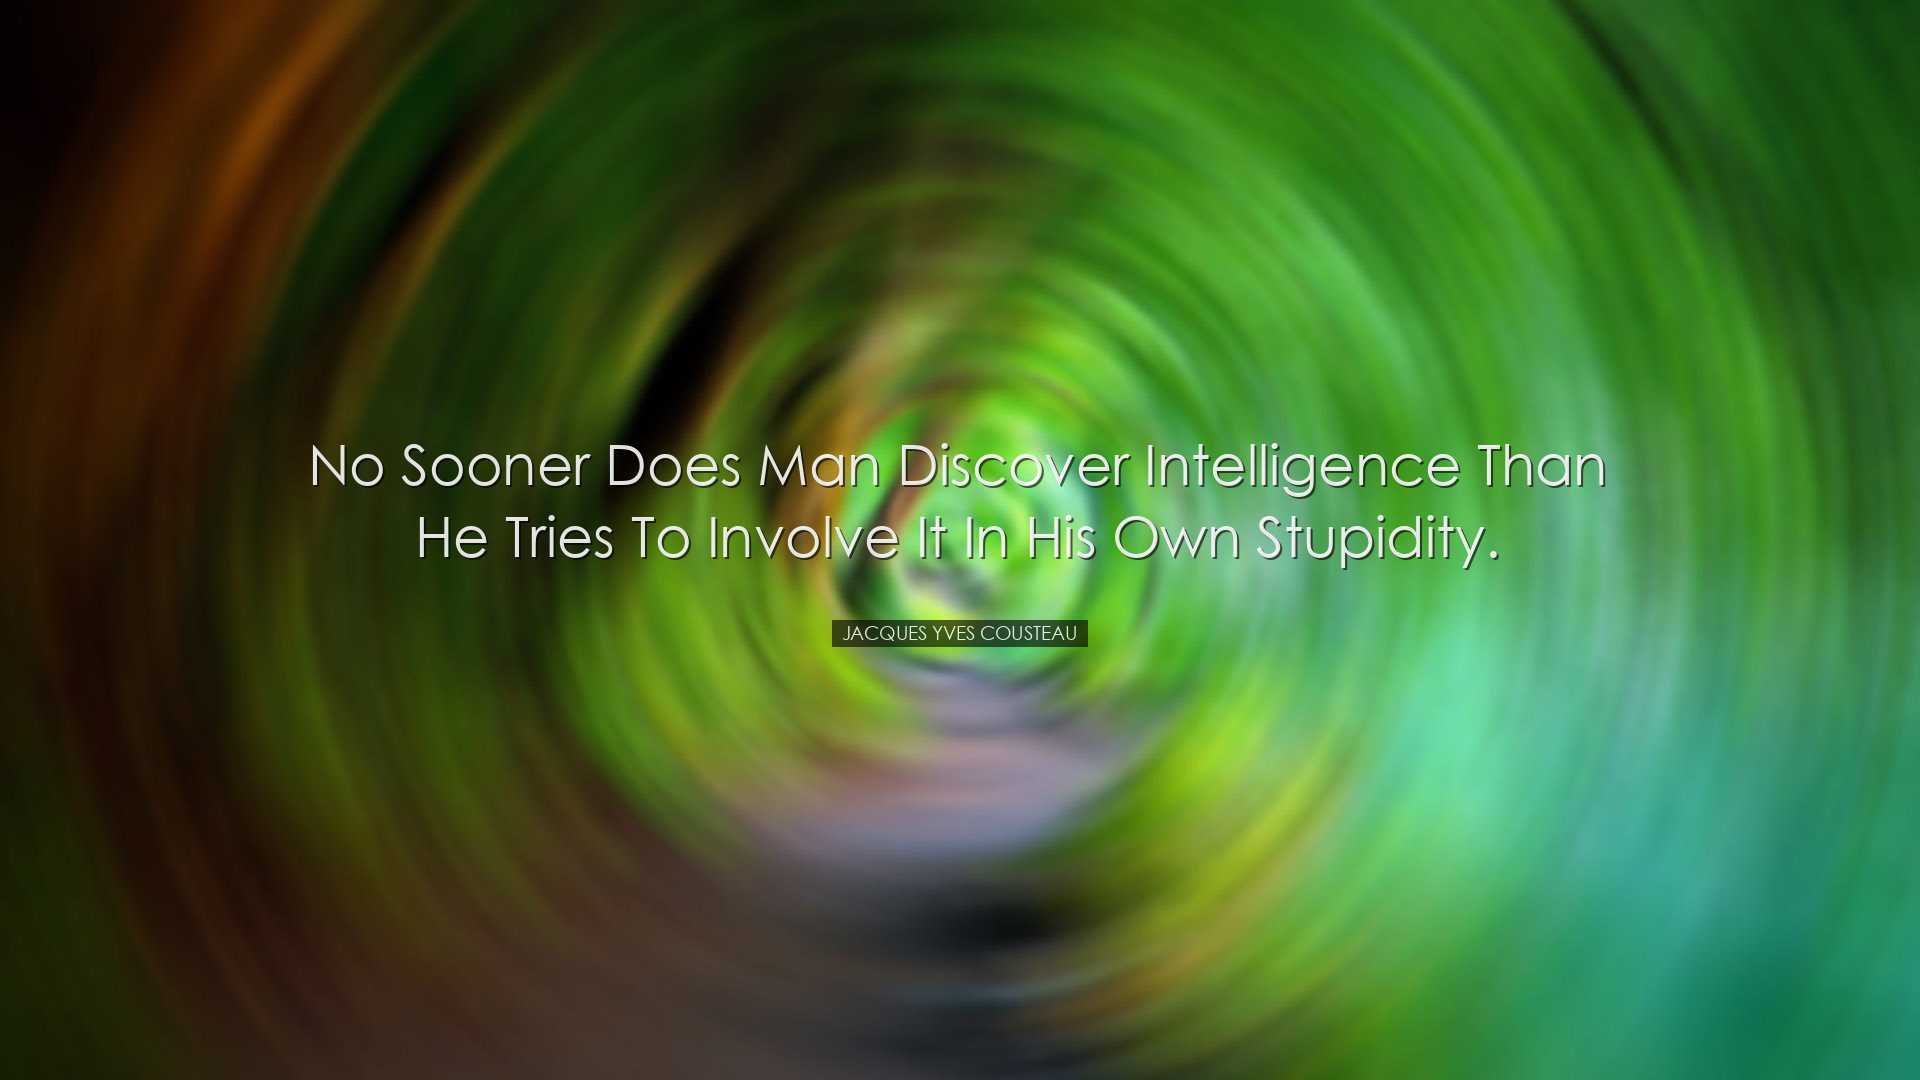 No sooner does man discover intelligence than he tries to involve